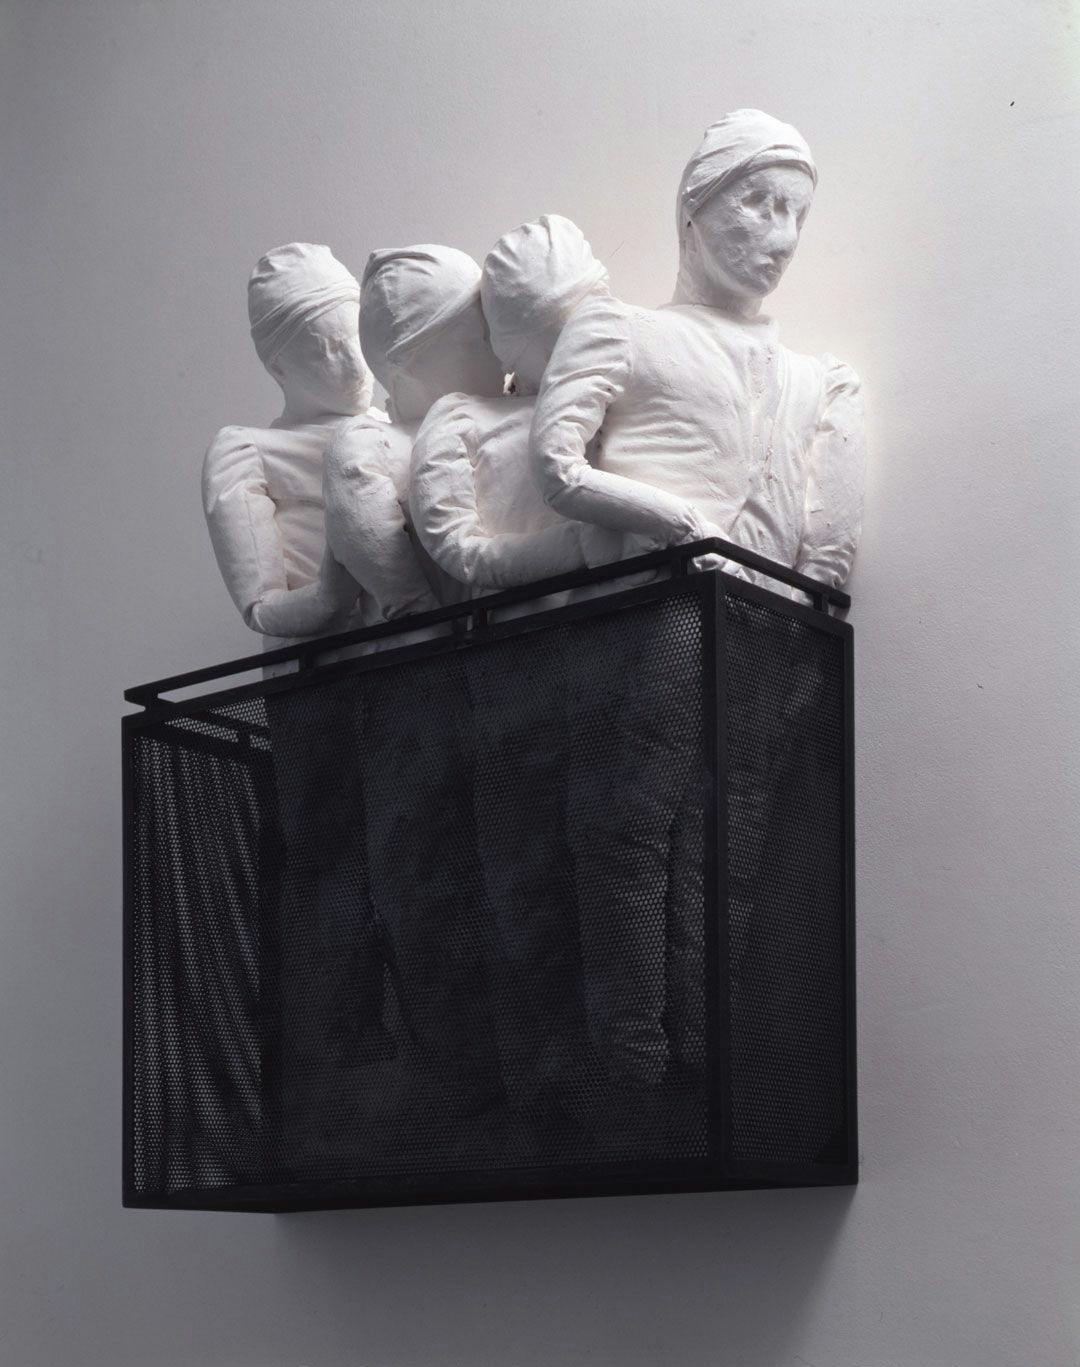 A mixed media wallhanging sculpture by Juan Muñoz, titled Sydney Balcony, dated 1991, at Marian Goodman Gallery, New York, in 2014.